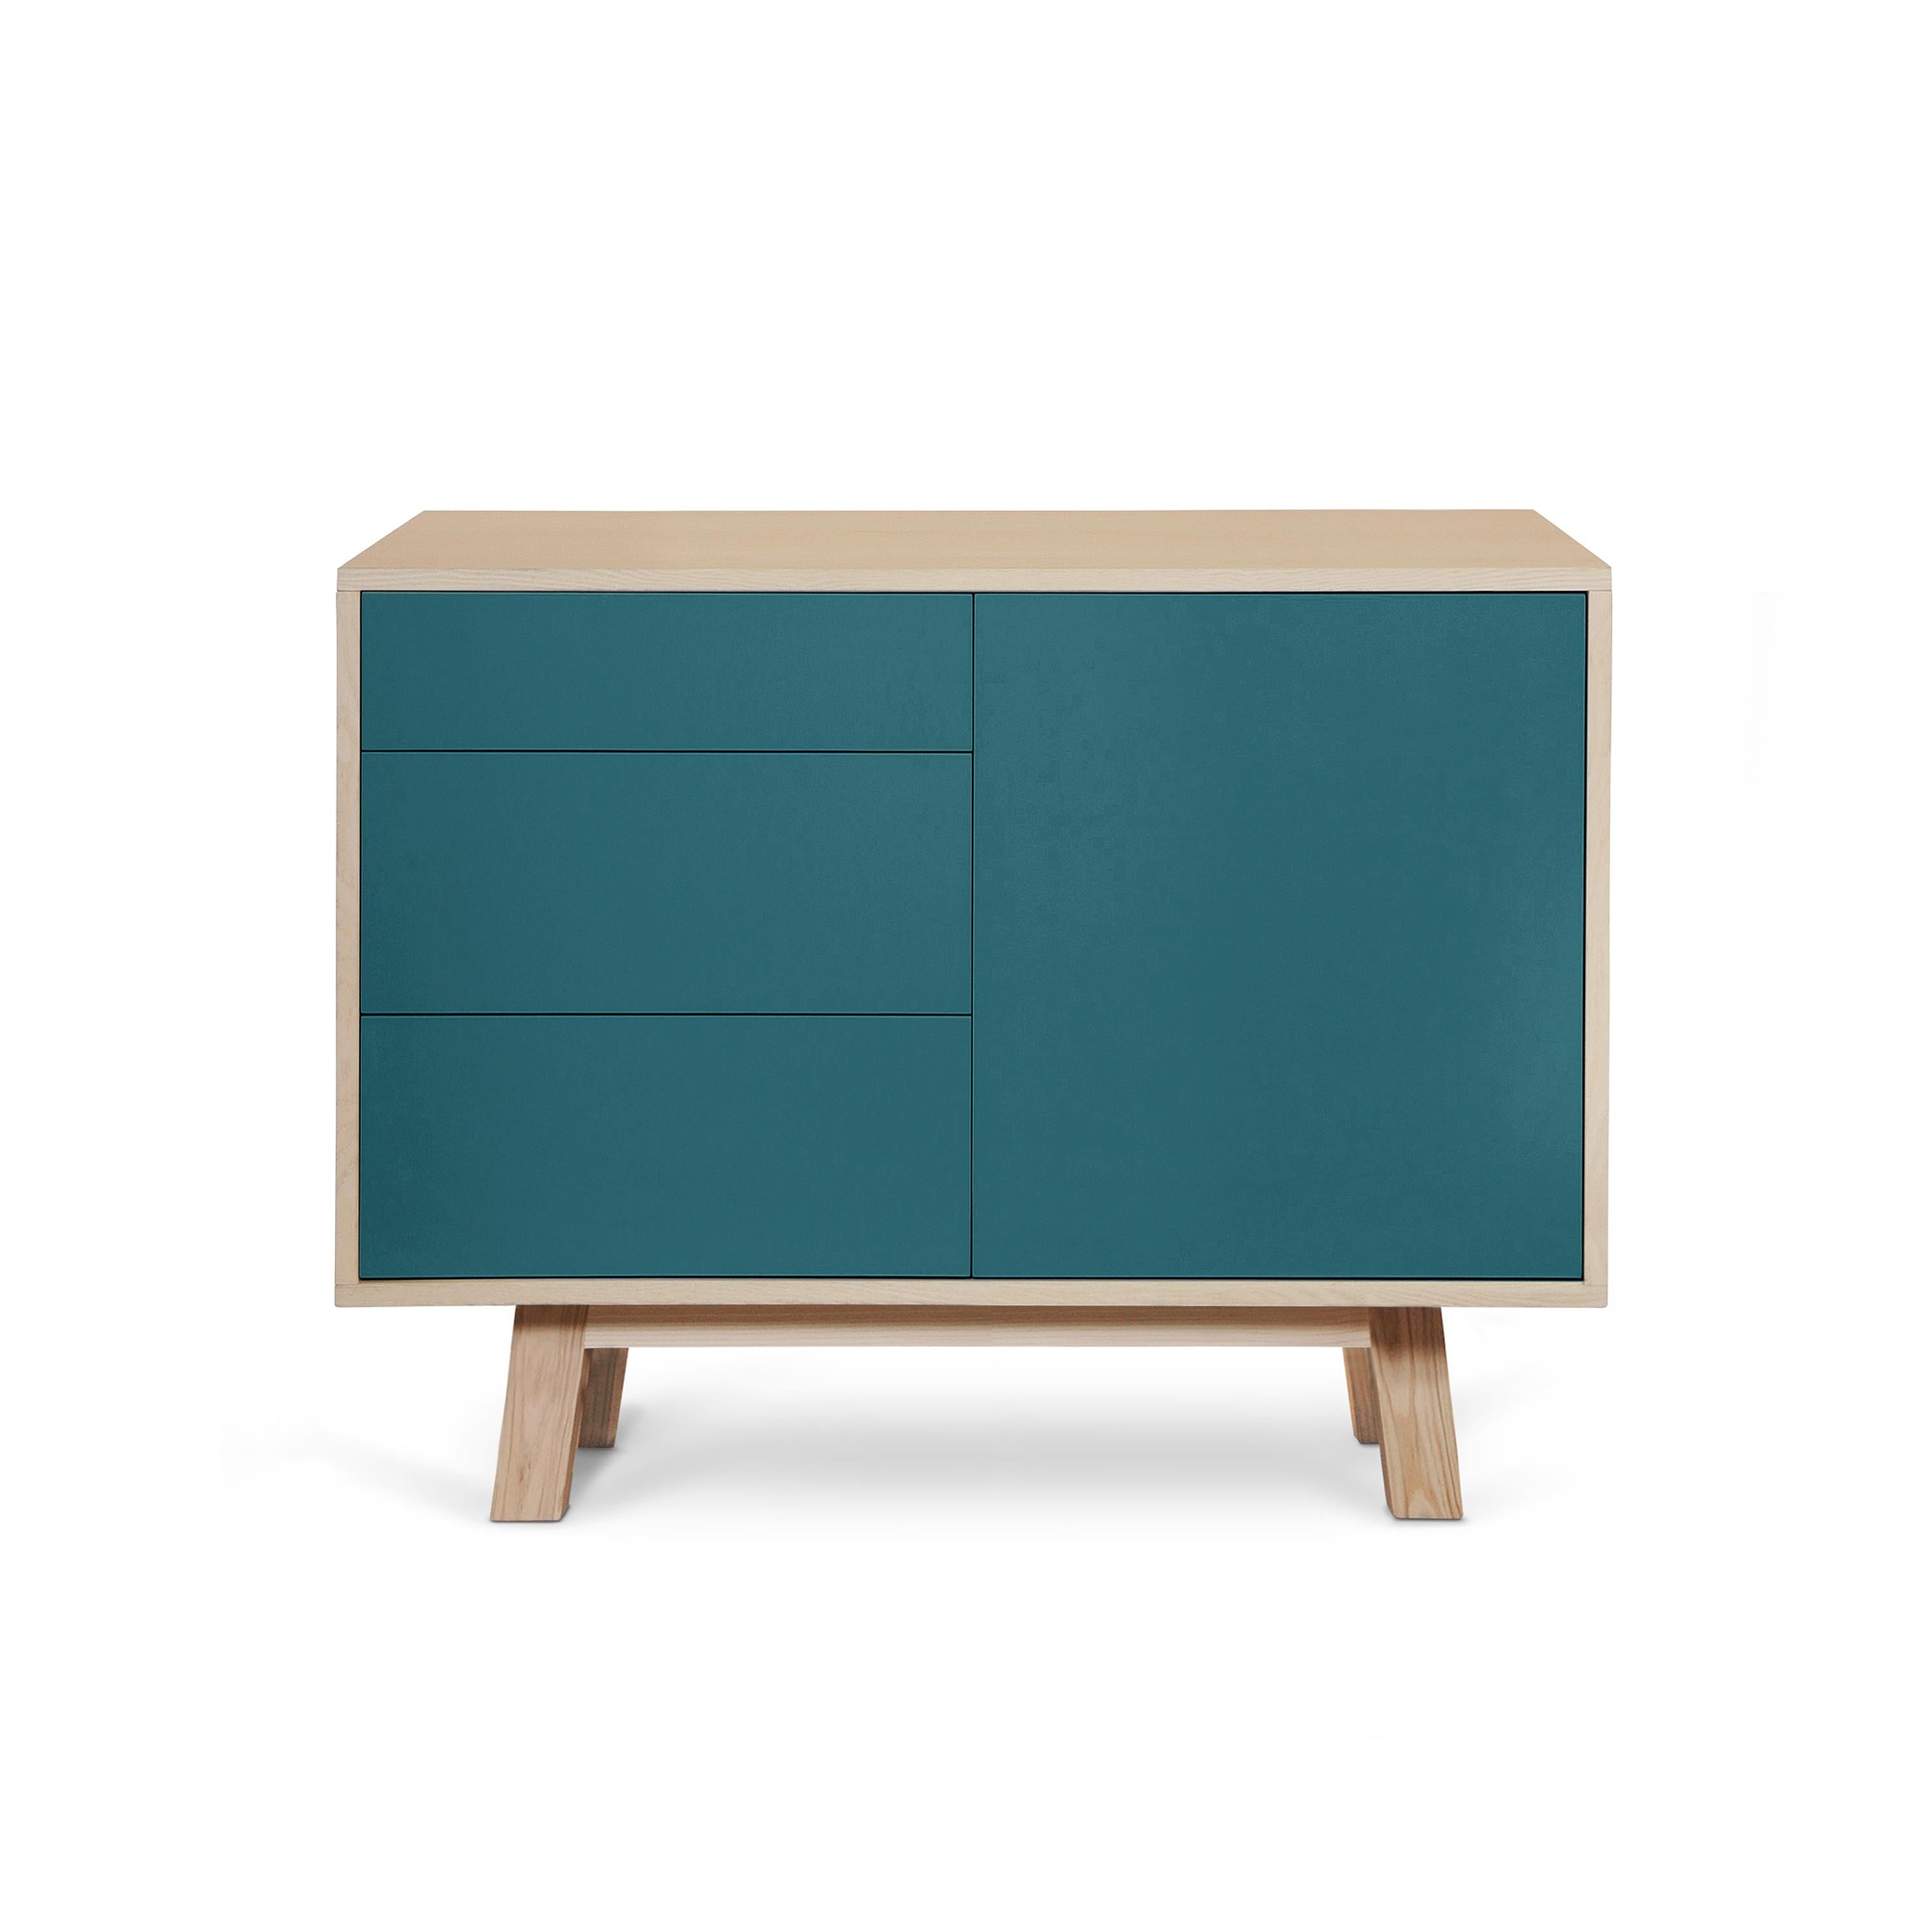 This 1-door and 3-drawer sideboard is designed by Eric Gizard - Paris.

It is 100% made in France with solid ash wood, veneer and lacquered doors in MDF panels. 

Each door and each drawer opens with a 